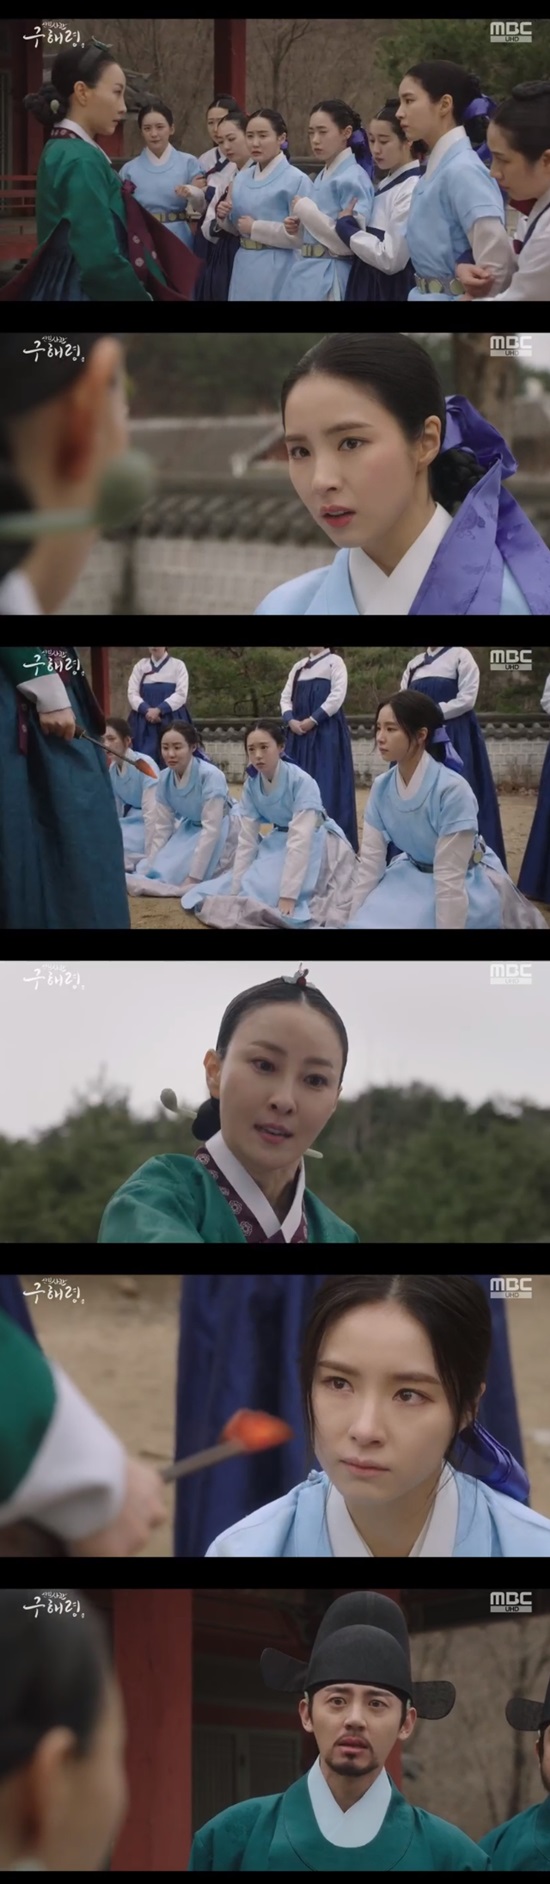 Lee Ji-hoon saved Dangers Shin Se-kyungOn the MBC drama Na Hae-ryung, which aired on July 25, the old Na Hae-ryung (played by Kim Ho-soo/directed by Kang Il-soo Han Hyun-hee) was slapped by Choi Sang-gung.Yee Mun-gwan Kwon Ji-koo and Song Sa-hee (Park Ji-hyun), Oh Eun-im (Lee Ye-rim), Hea-ran (Jang Yu-bin) met Dae-han Lim (Kim Yeo-jin), and were taken to Choi Sang-gung.When Na Hae-ryung asked, What is this doing? Choi Sang-gung slapped her hard and said, I will teach you the law of my housekeeper today.The Kwonjis were soon kneeled down, and the top palace said, Be careful, the girl who makes a mouthful is lost, the girl who steals the thing is cut off, and the girl who committed the injustice is blown away.Remember that you have no eyes and no heart. You can keep your breath down and follow the orders of the war.When Koo responded, Why should we do that? We are officers. How should we follow the rules of the Ministry of Land, Infrastructure and Transport? Choi Sang-gung said, Do you think were a man because we hit the past?You think youre a man in a robe. Anyone who comes into the palace is your lady. You live and die under the Imperial Code.If you do not know your topic, I will not forget it forever. Yoo Gyeong-sang